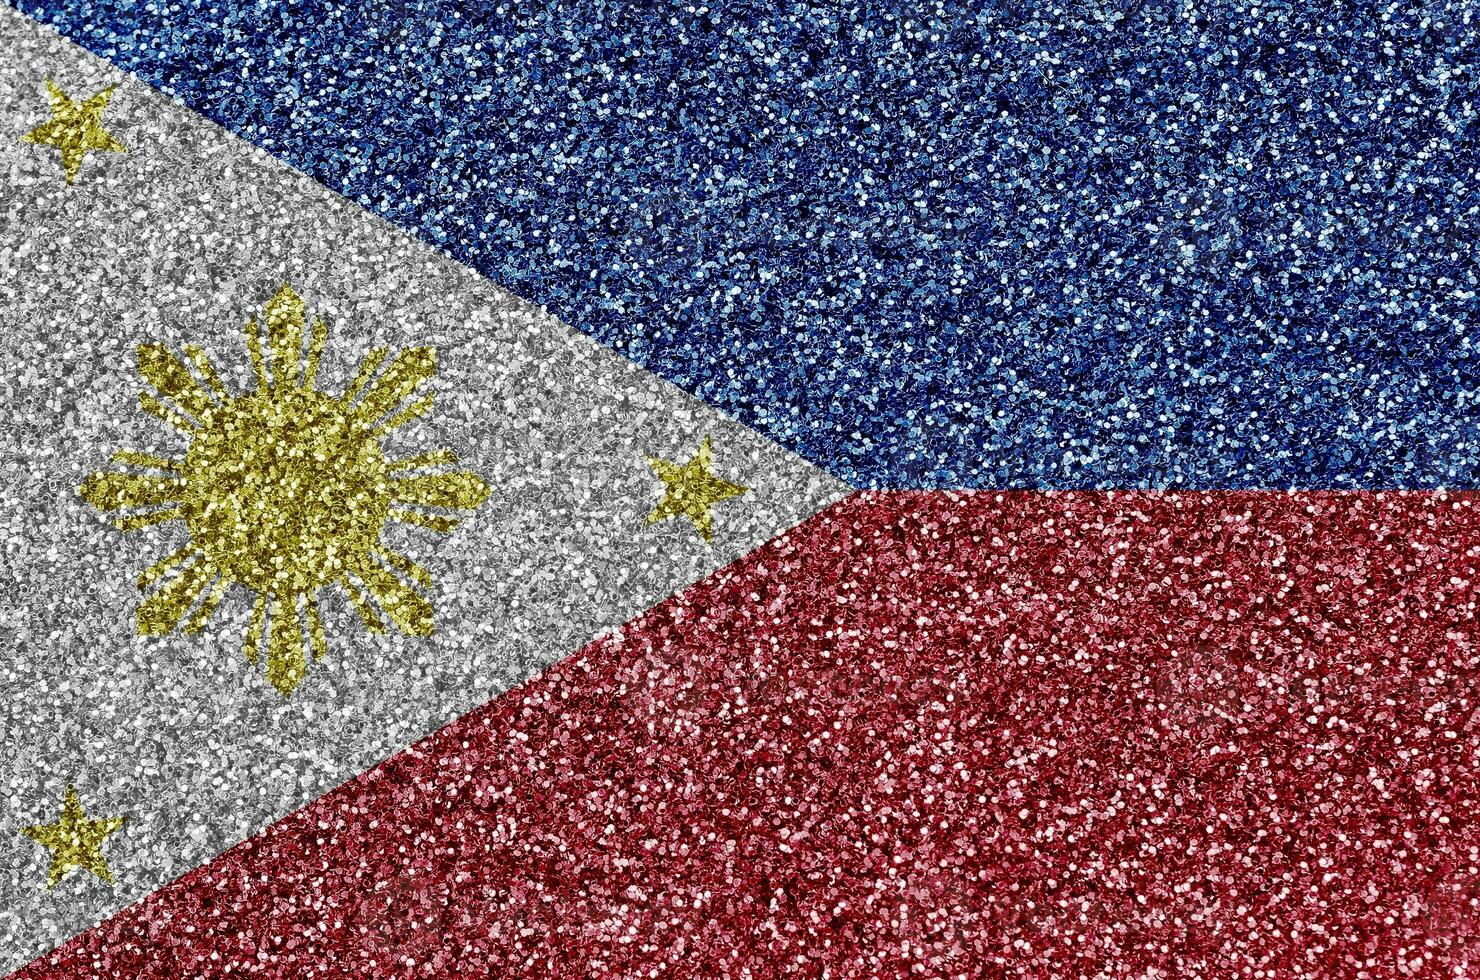 Philippines flag depicted on many small shiny sequins. Colorful festival background for party photo